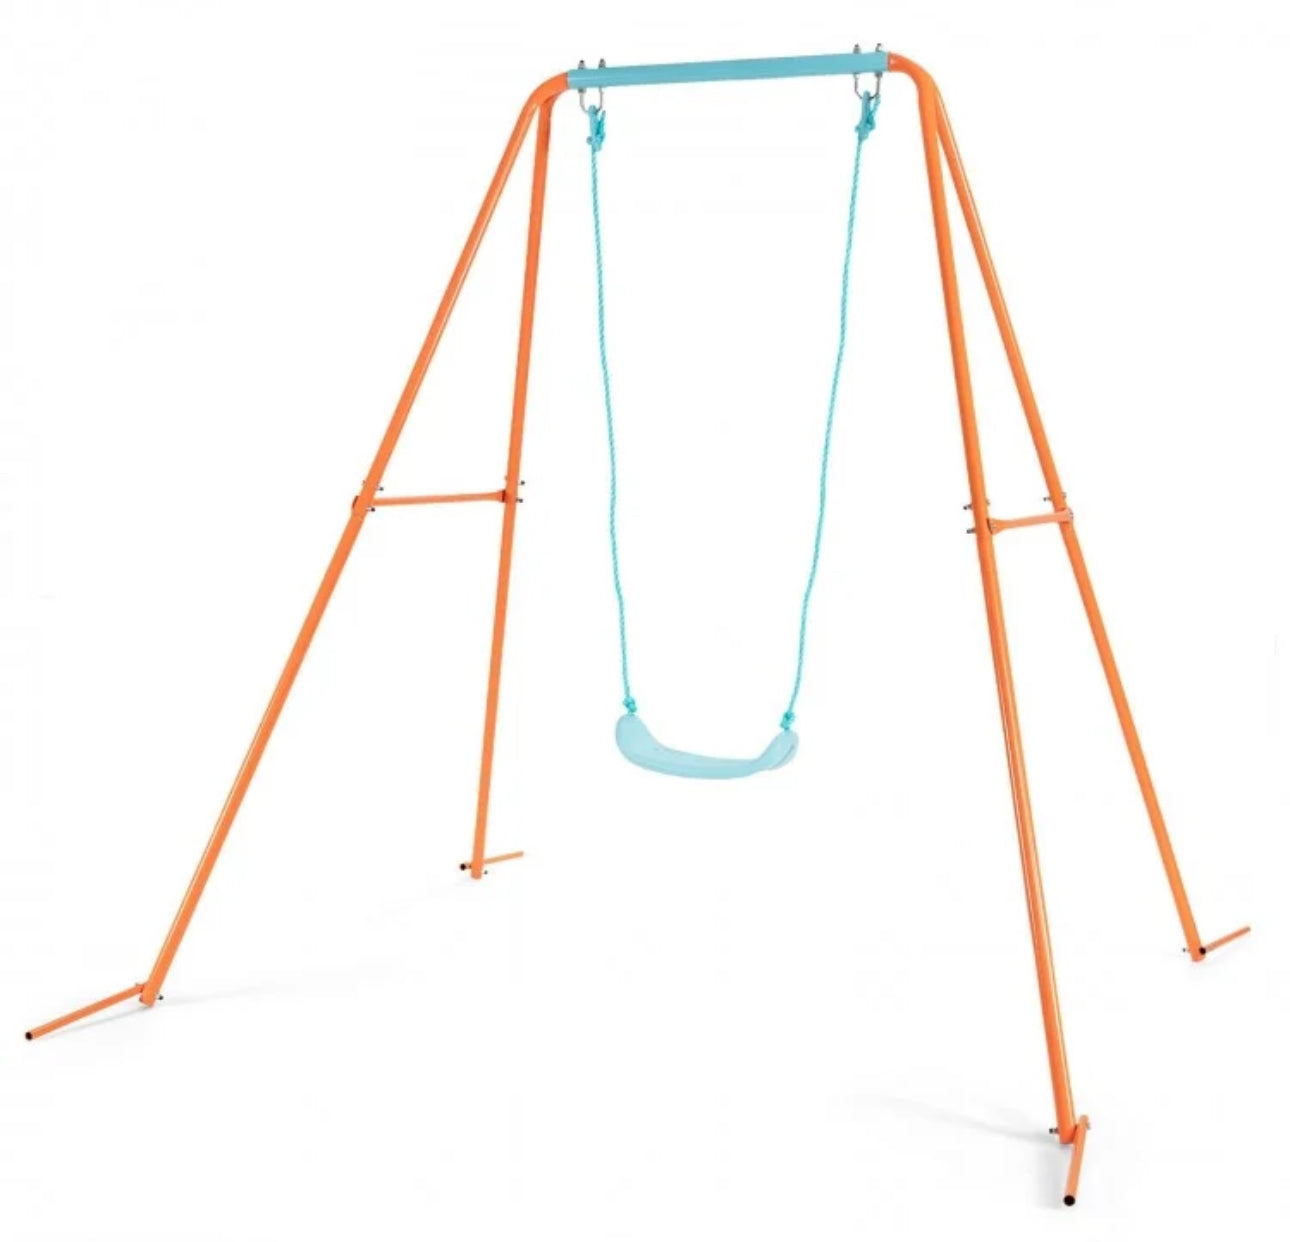 Super Fun Heavy Duty Outdoor Kids Swing Set | Strong Frame | Ground Stakes | Easy Assembly | Holds 110lbs | Great For Any Playground